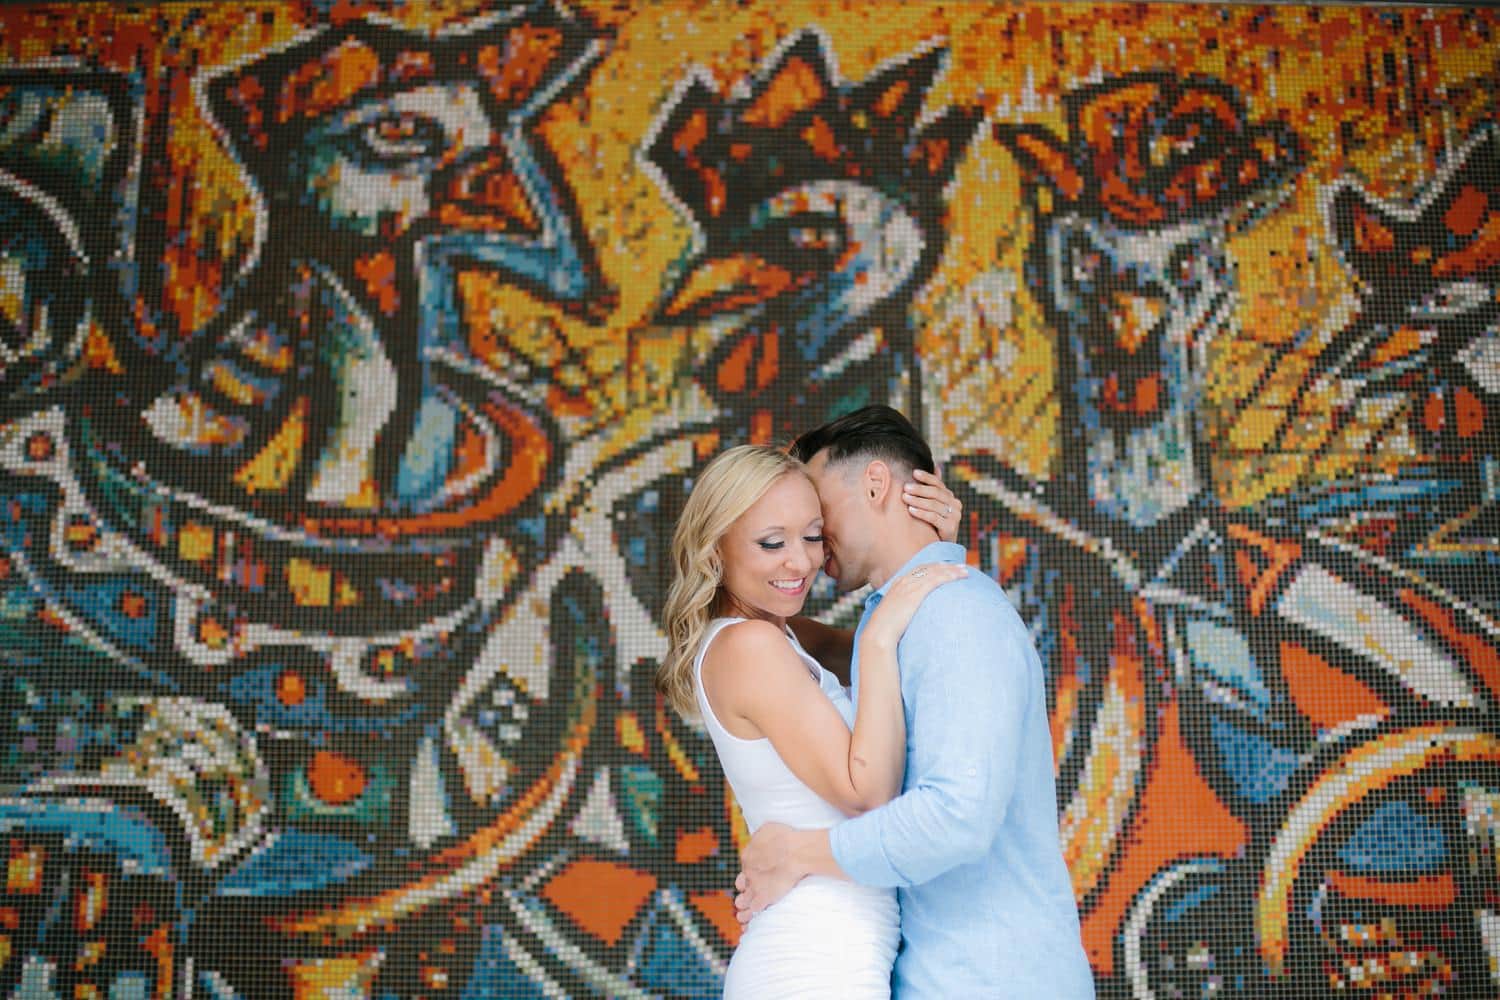 Colorful engagement photography at Little Havana, Miami